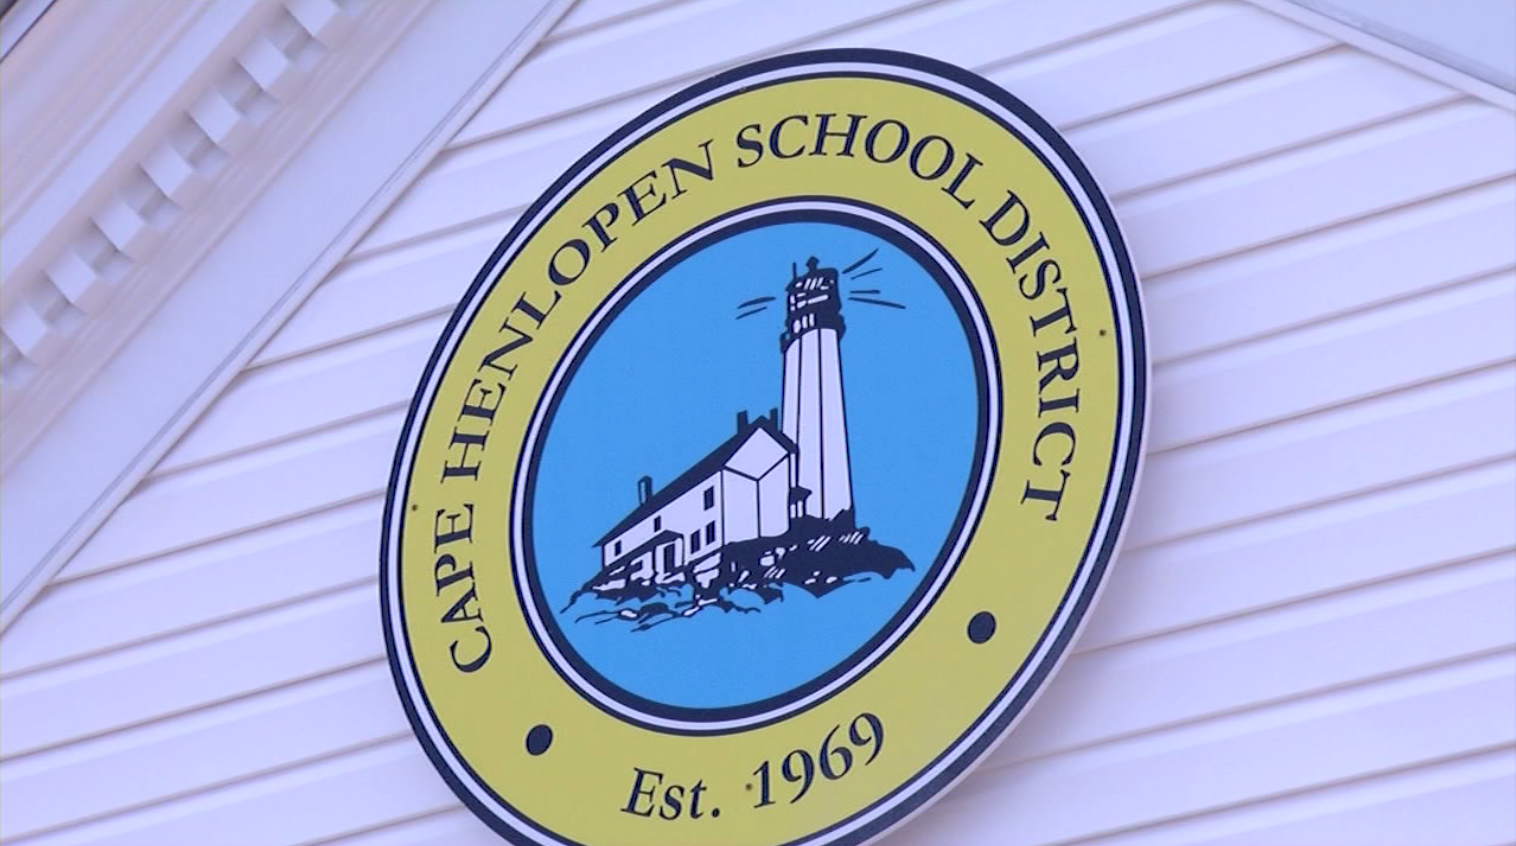 Cape Henlopen School District offering meals for students during COVID